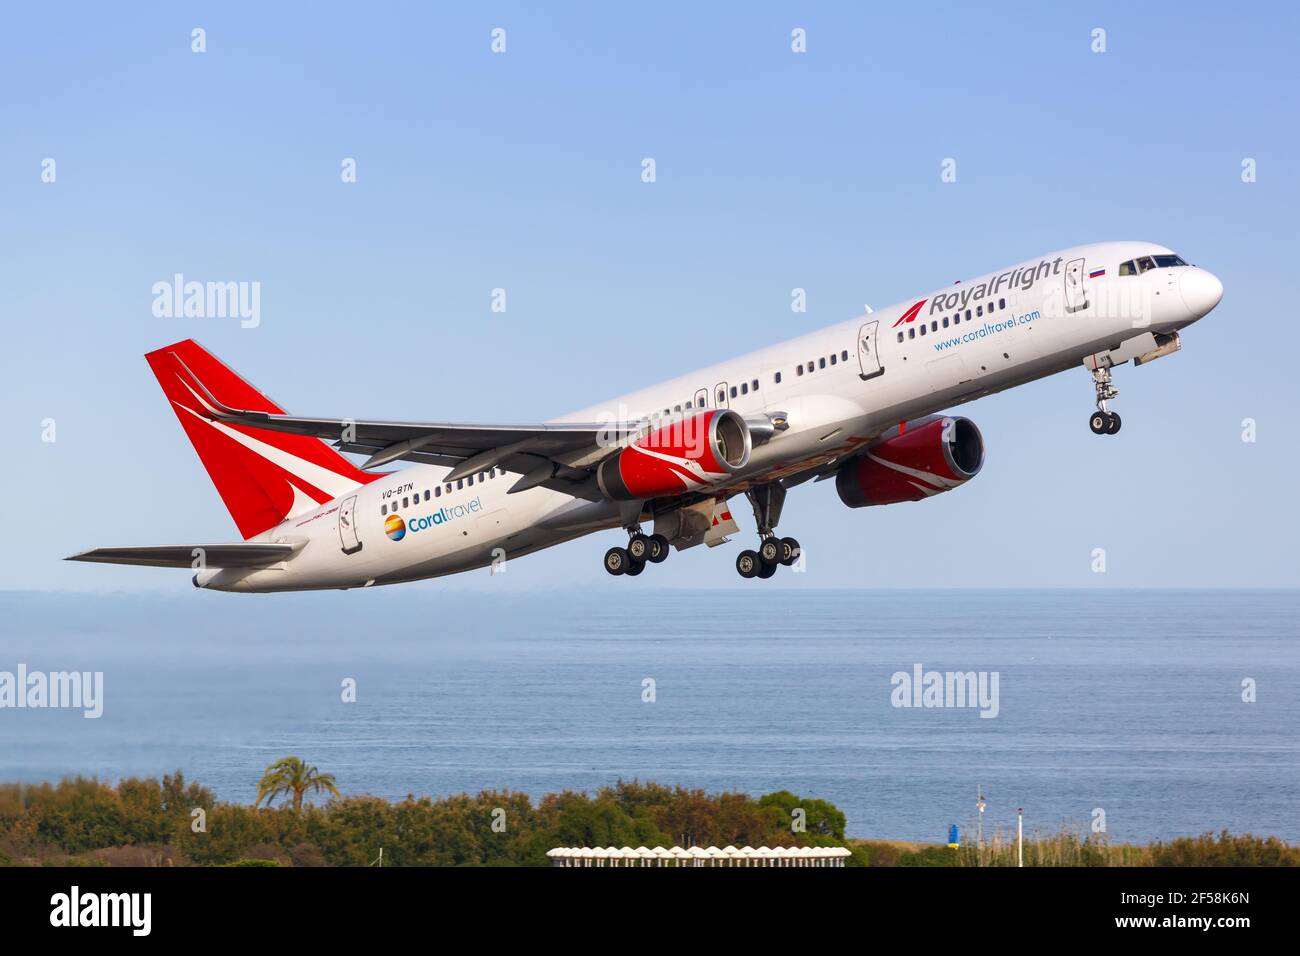 Barcelona, Spain - June 9, 2018: Royal Flight Boeing 757 airplane taking off at Barcelona airport in Spain. Boeing is an American aircraft manufacture Stock Photo